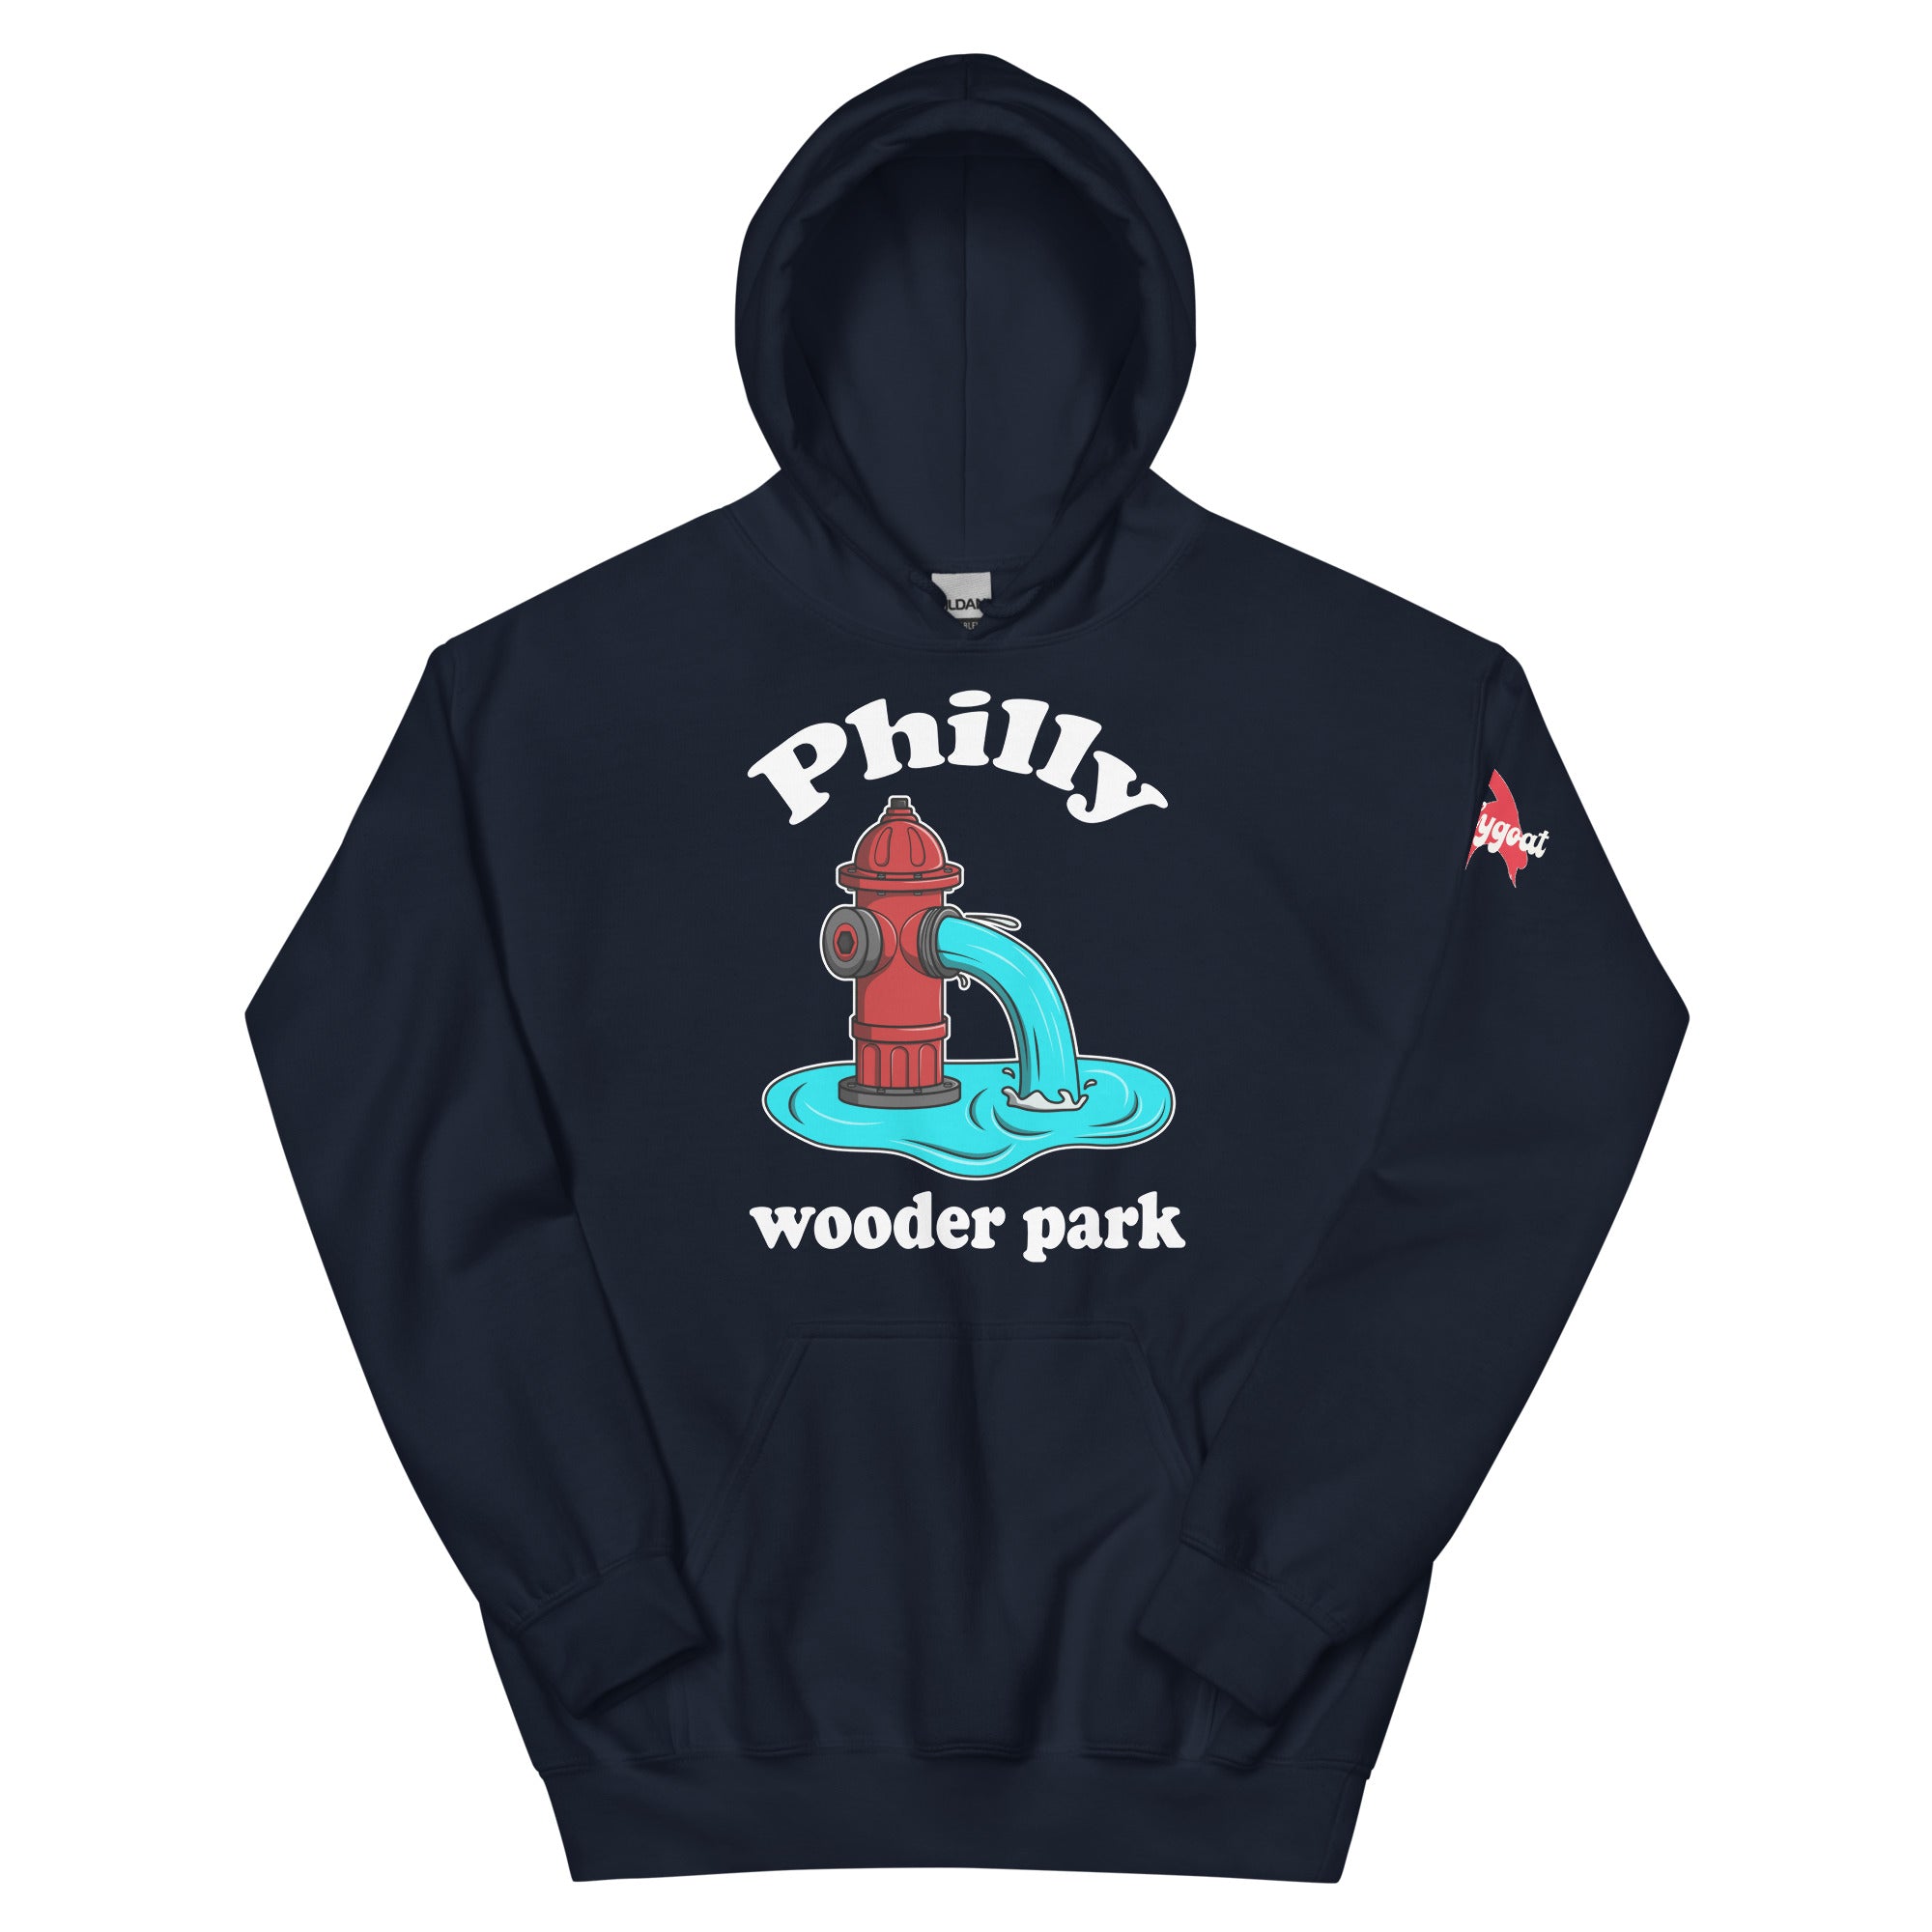 Philadelphia Philly wooder park water park fire hydrant funny navy blue hoodie from Phillygoat